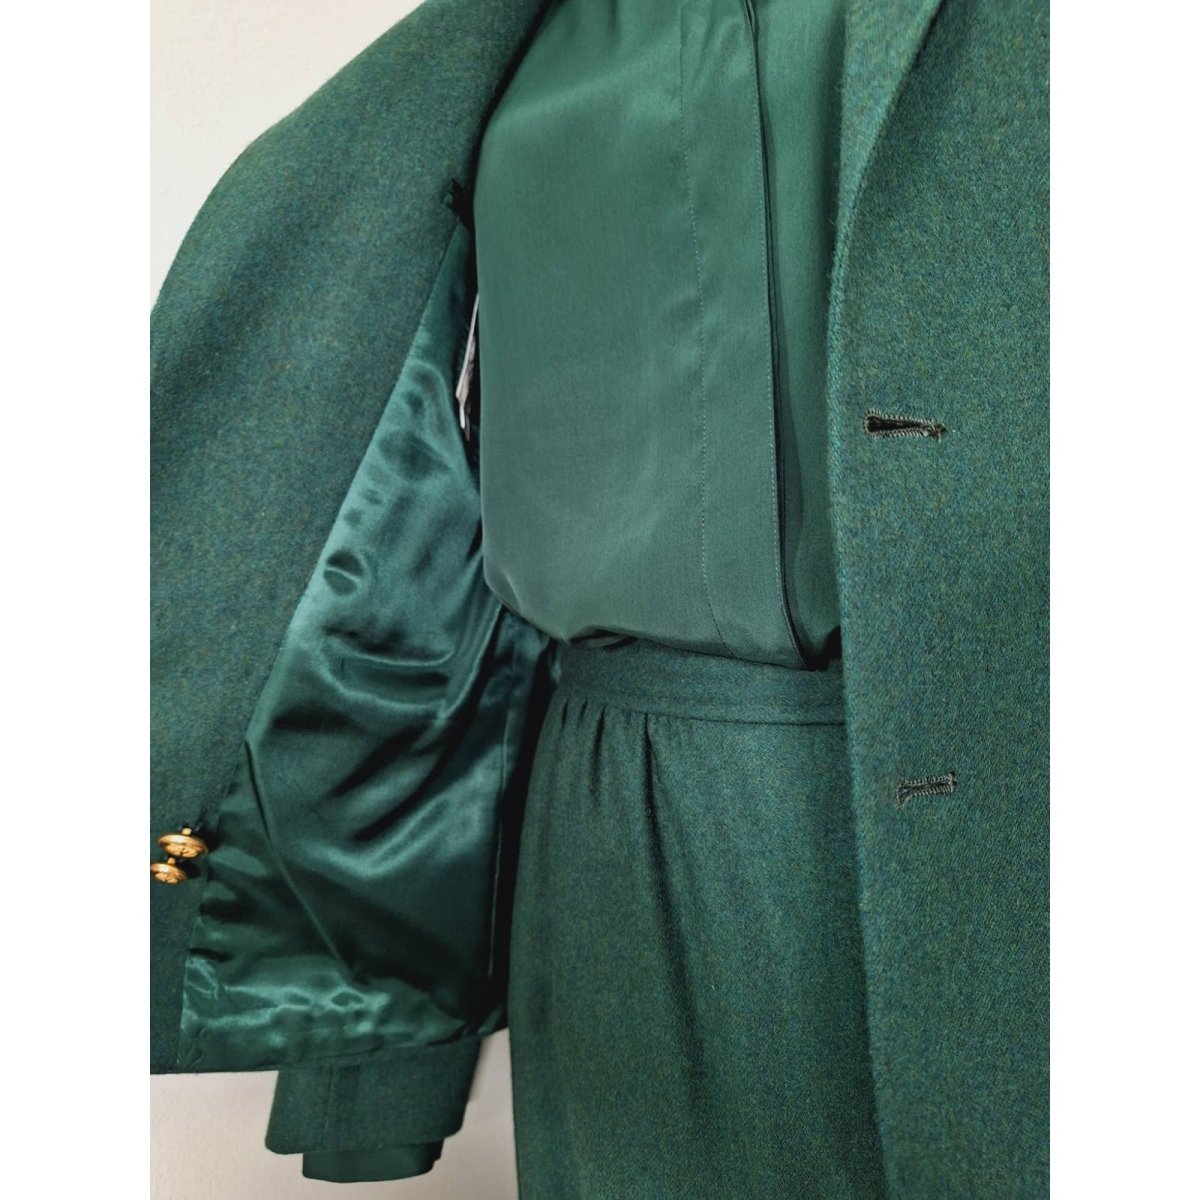 70s/80s Green Monochrome Anchor Button 3 Piece Skirt Suit Size 6 34/28/40 - themallvintage The Mall Vintage